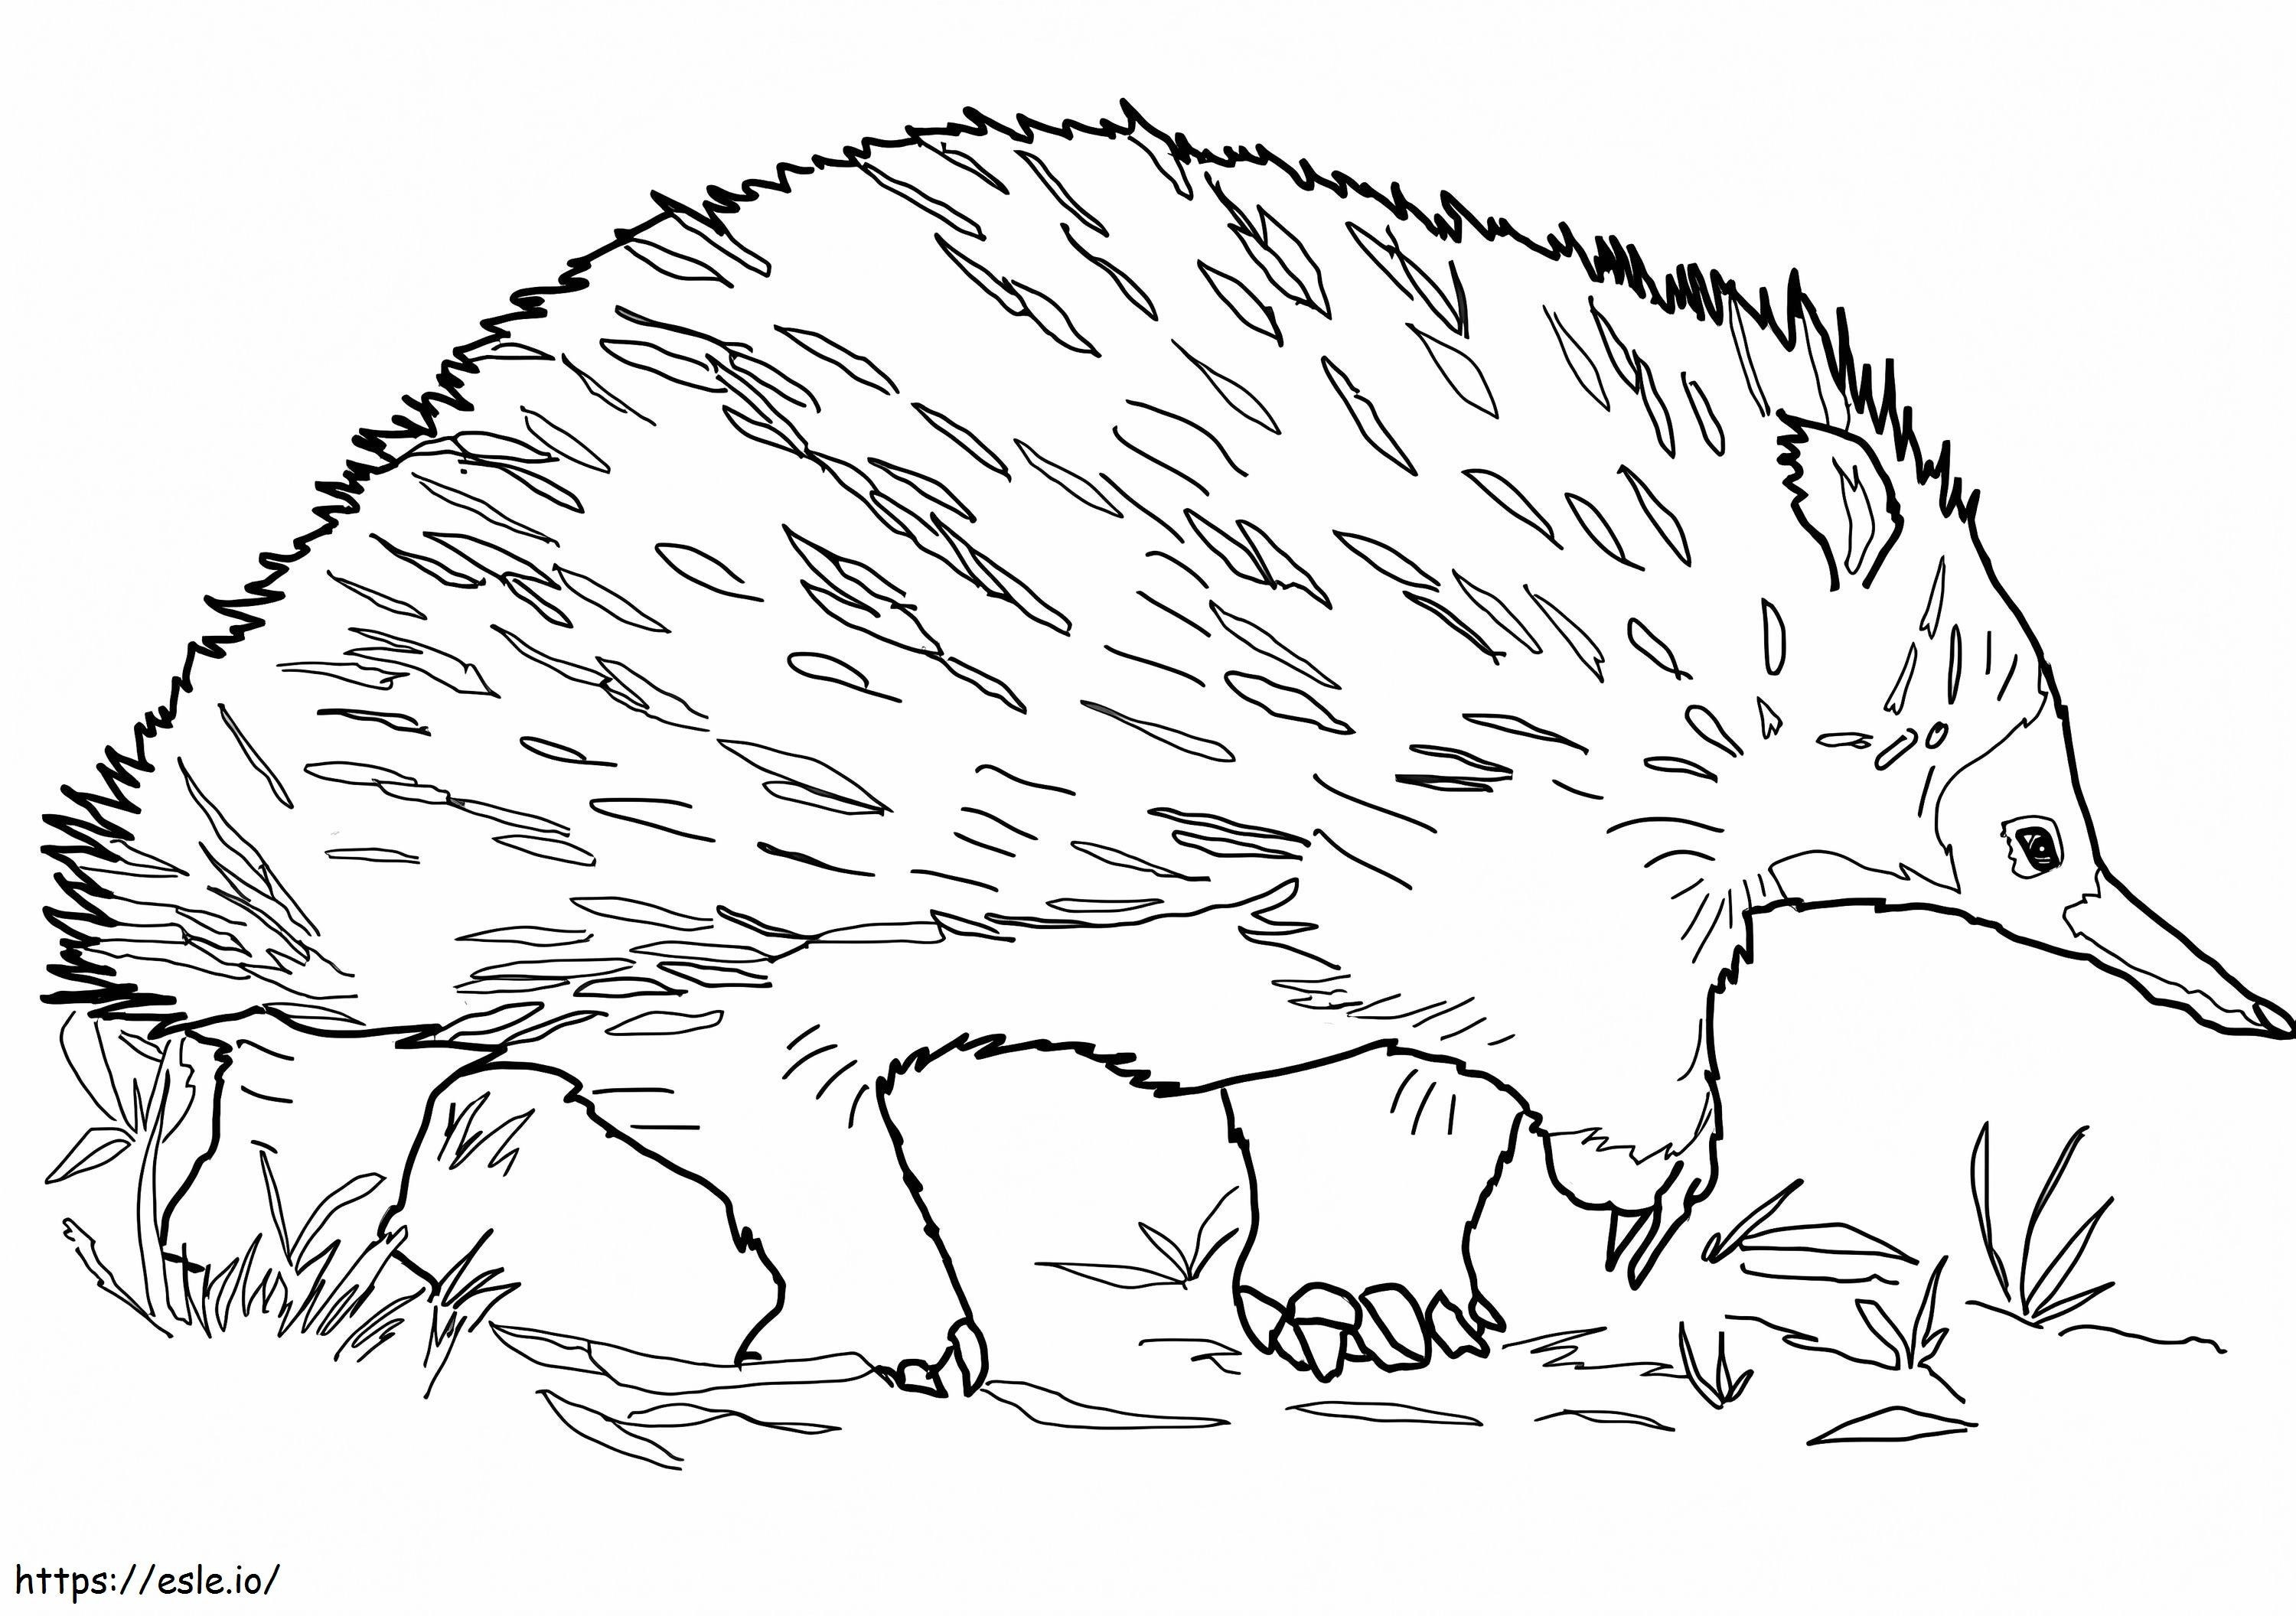 Walking Echidna coloring page